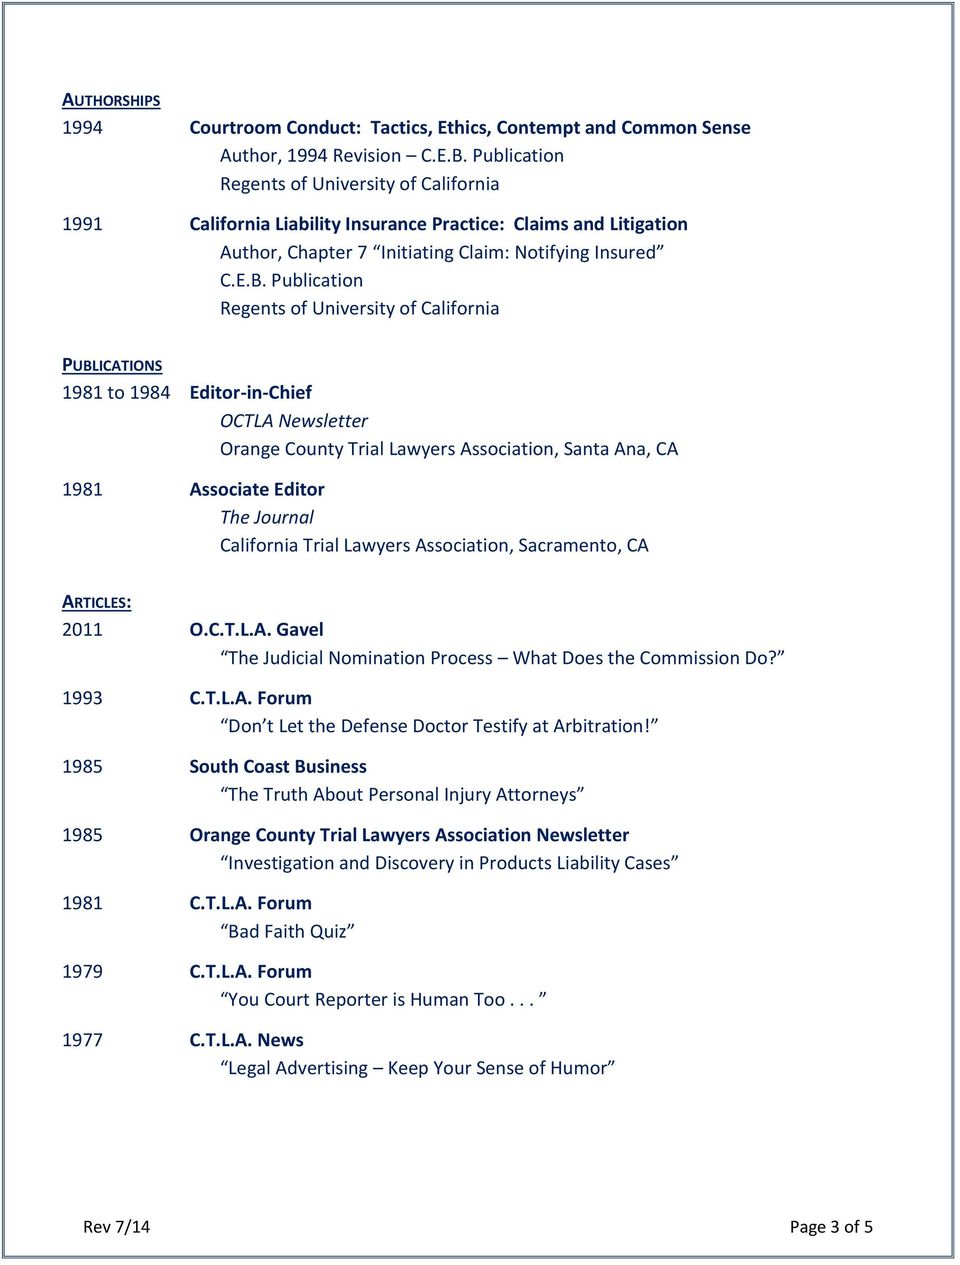 Publication Regents of University of California PUBLICATIONS 1981 to 1984 Editor-in-Chief OCTLA Newsletter Orange County Trial Lawyers Association, Santa Ana, CA 1981 Associate Editor The Journal